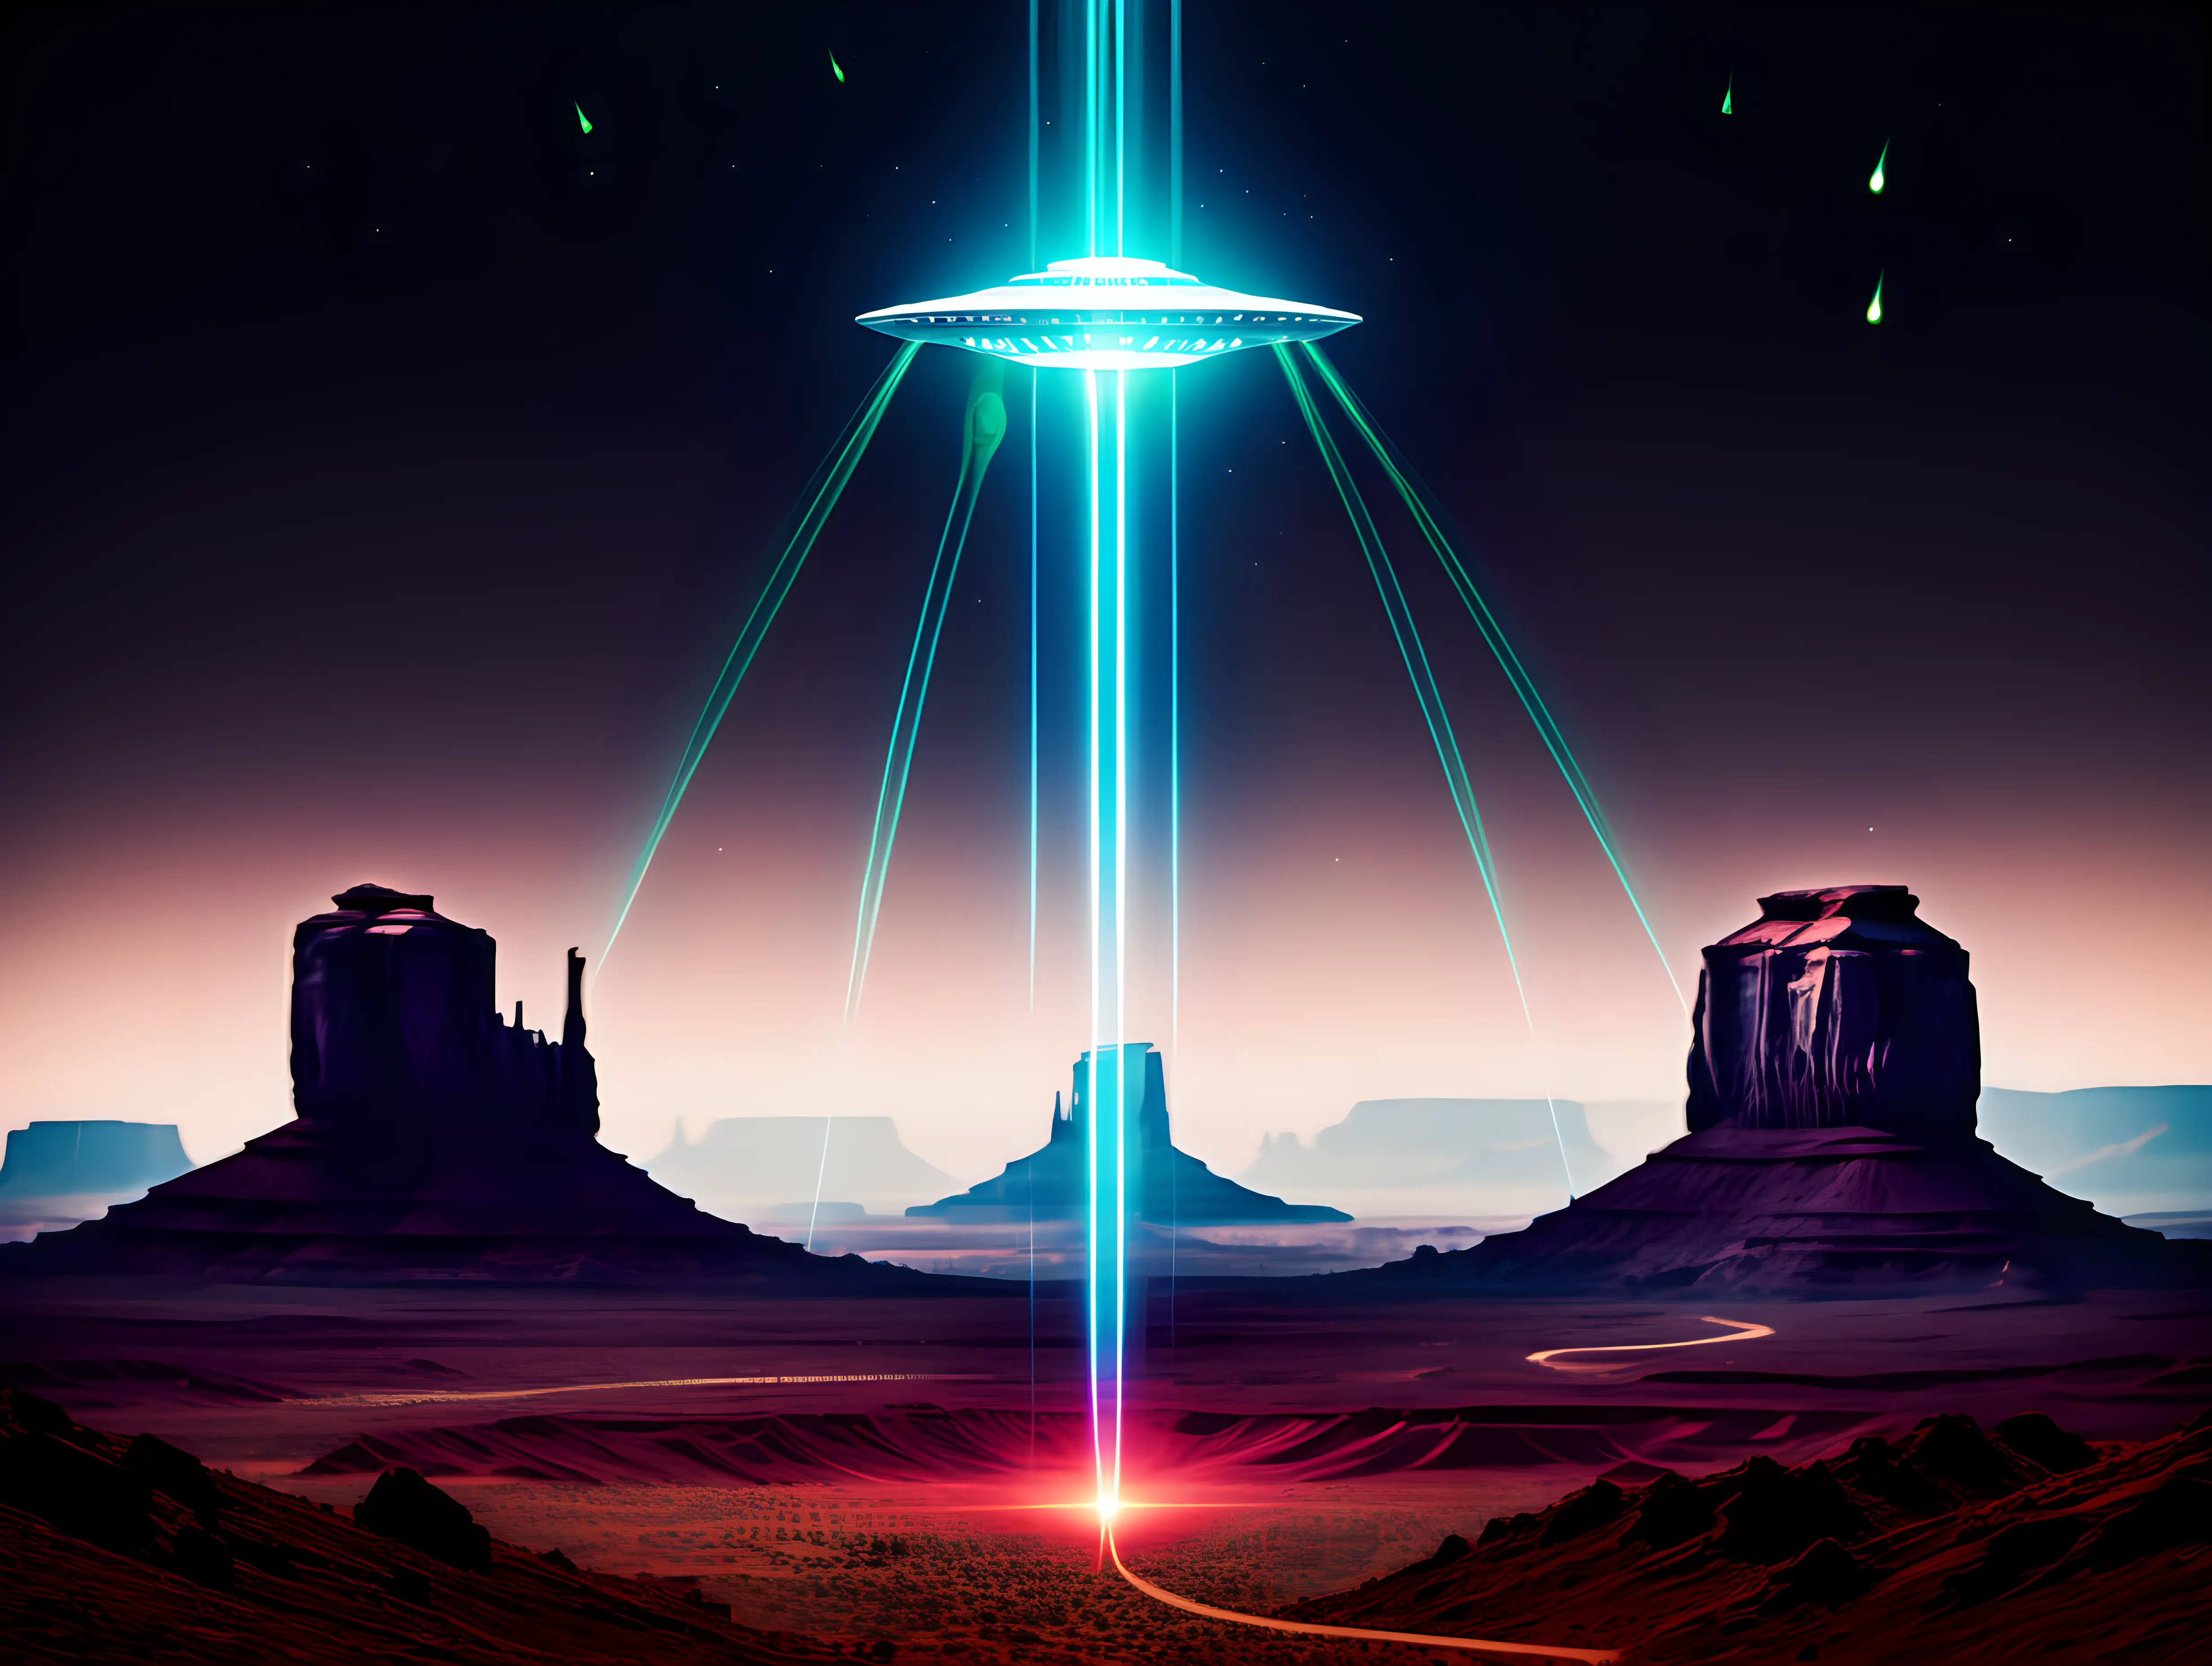 Multiple Alien spaceships shooting lasers at Monument Valley